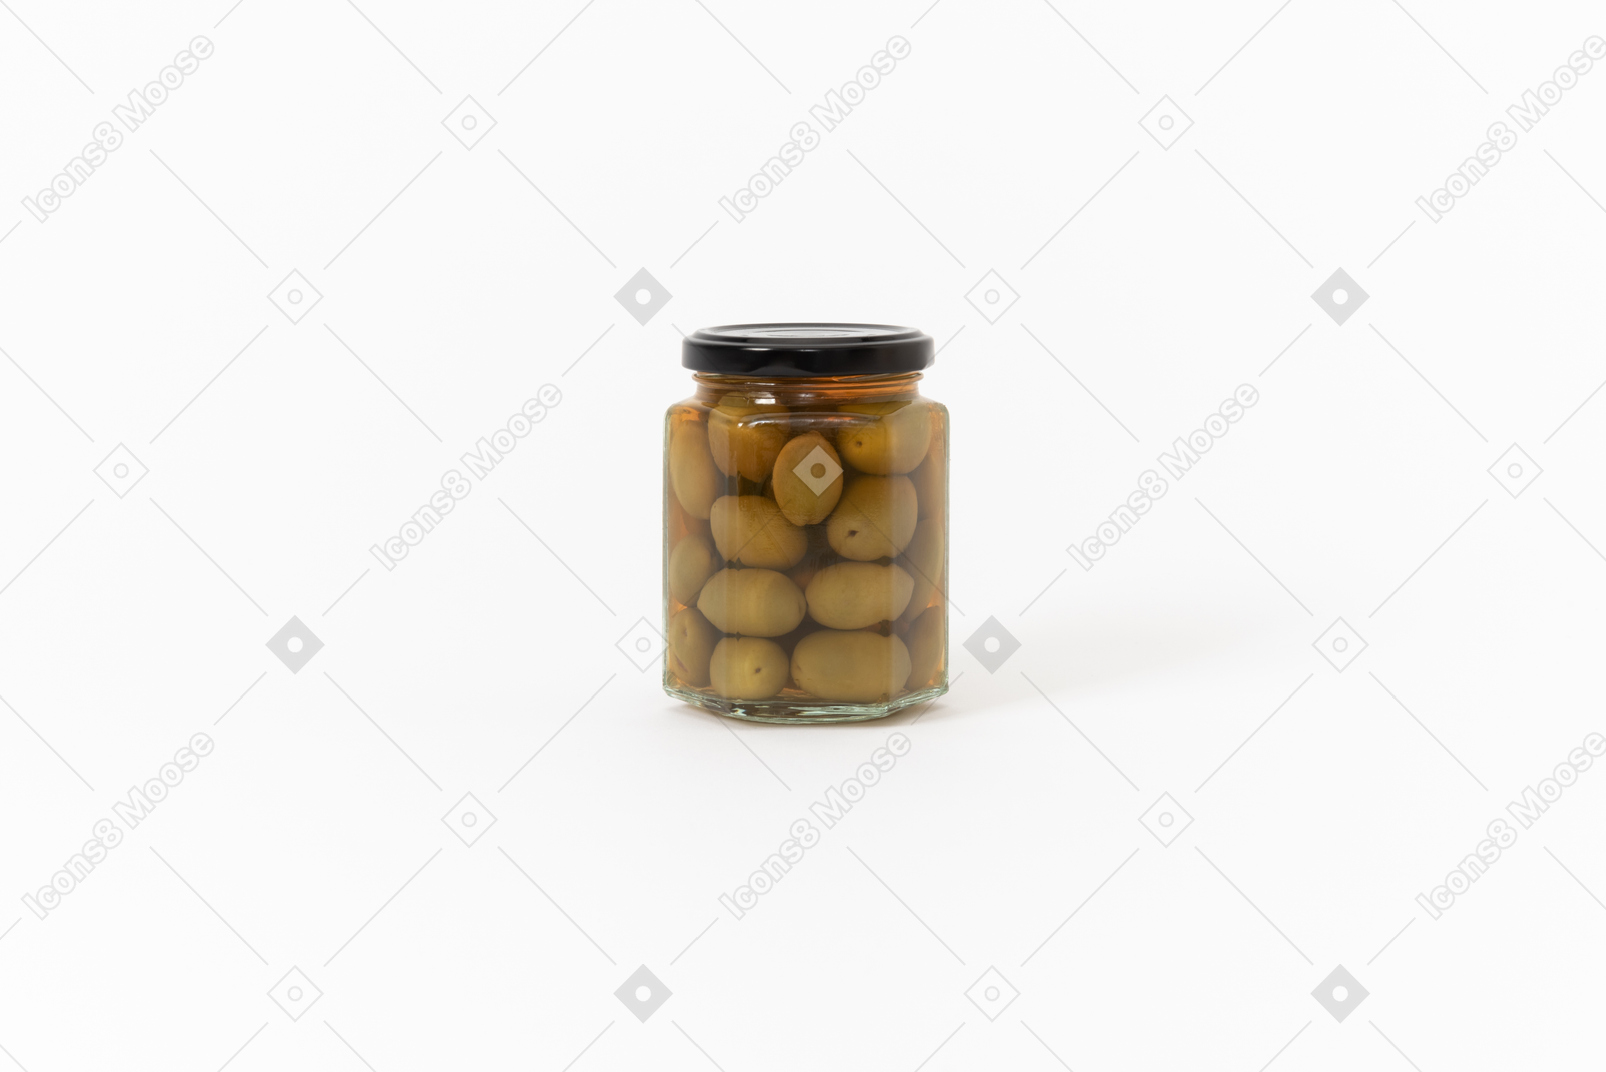 Canned olives in a glass jar